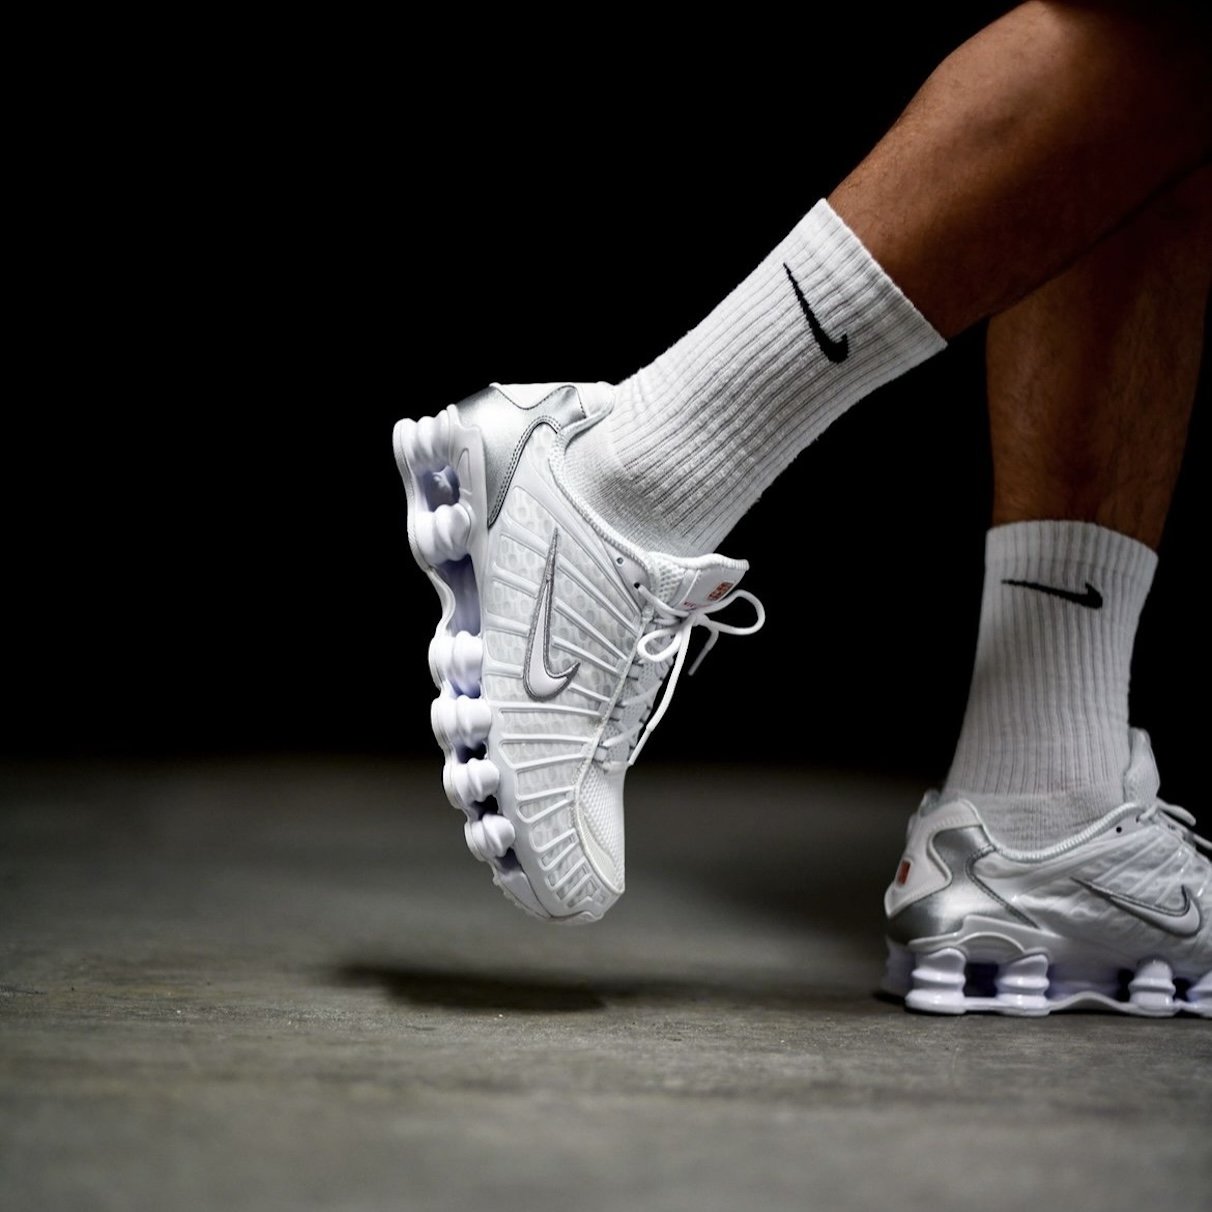 Explained: The Hype Around the Nike Shox Silhouette